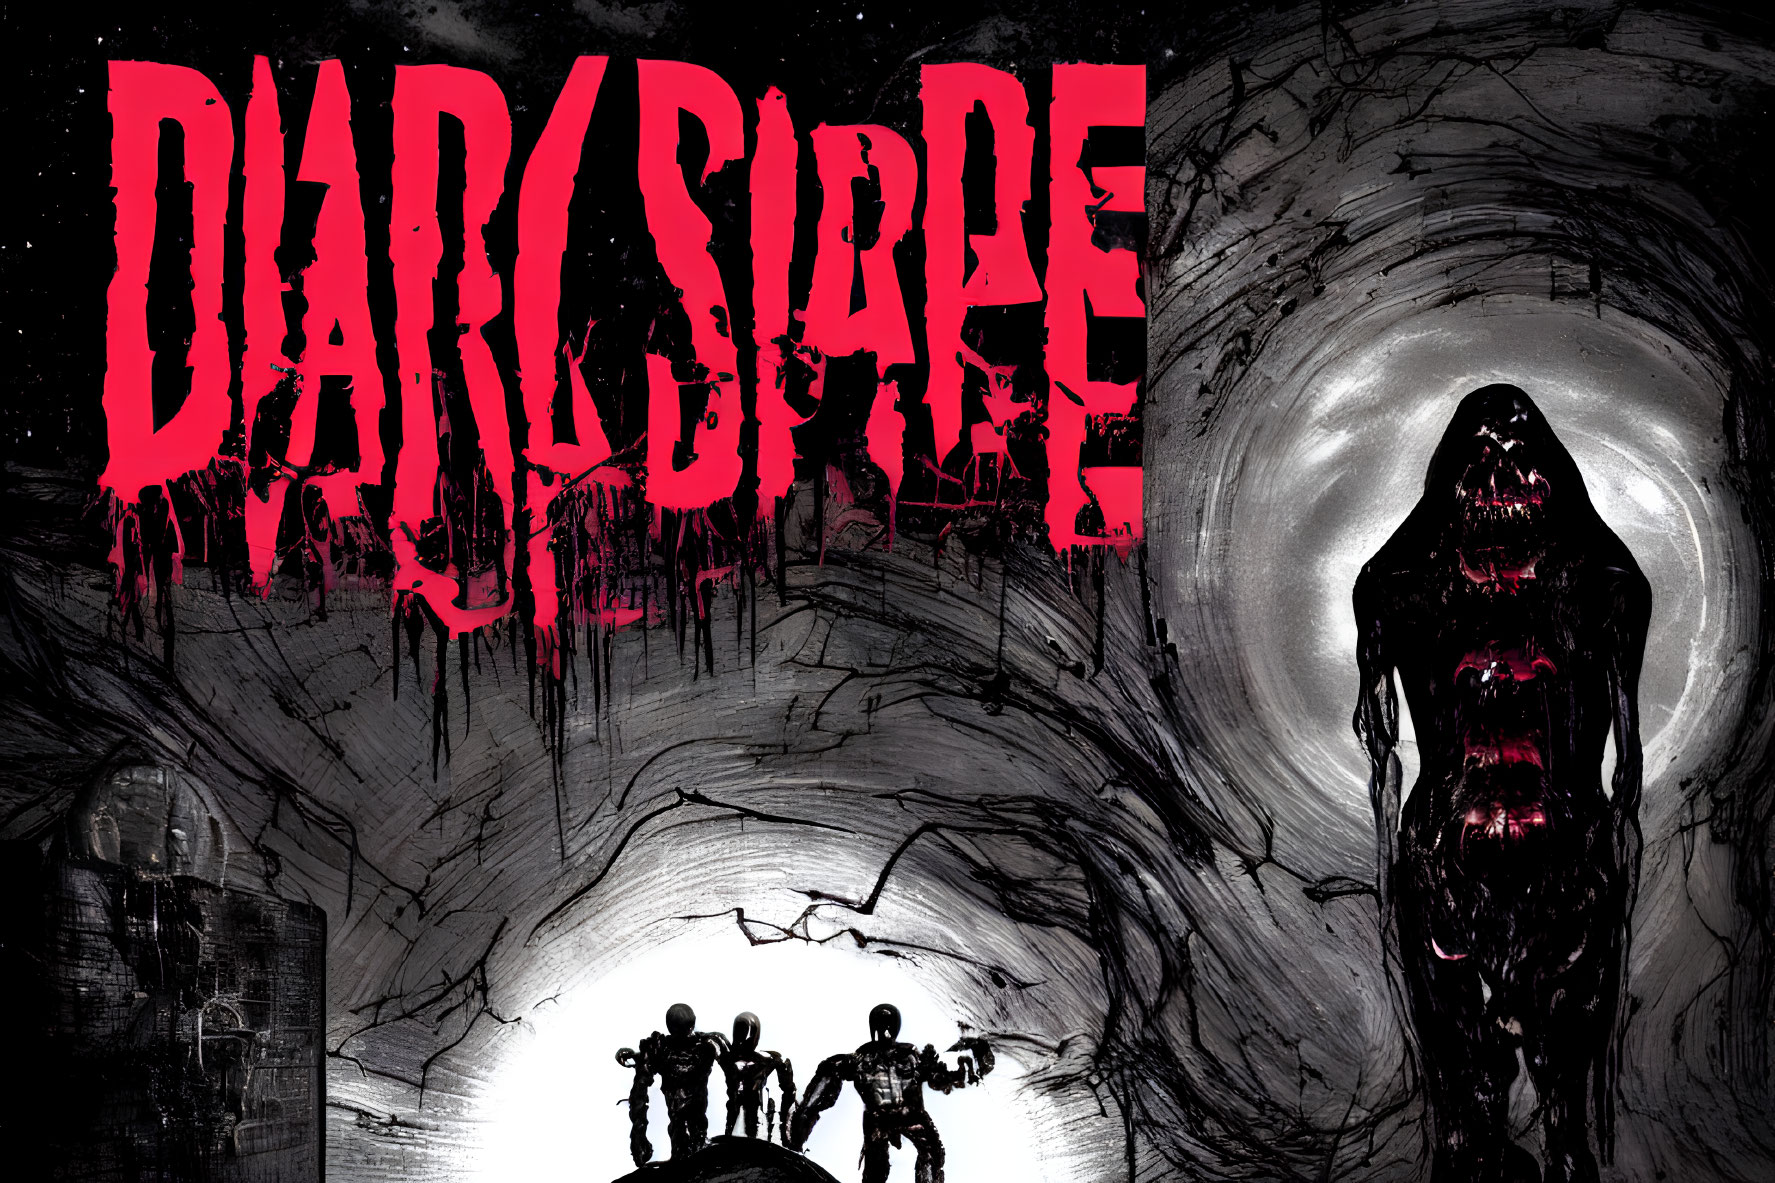 Sinister graphic: "DARKSIDE" in blood-red letters, shadowy figure over smaller sil